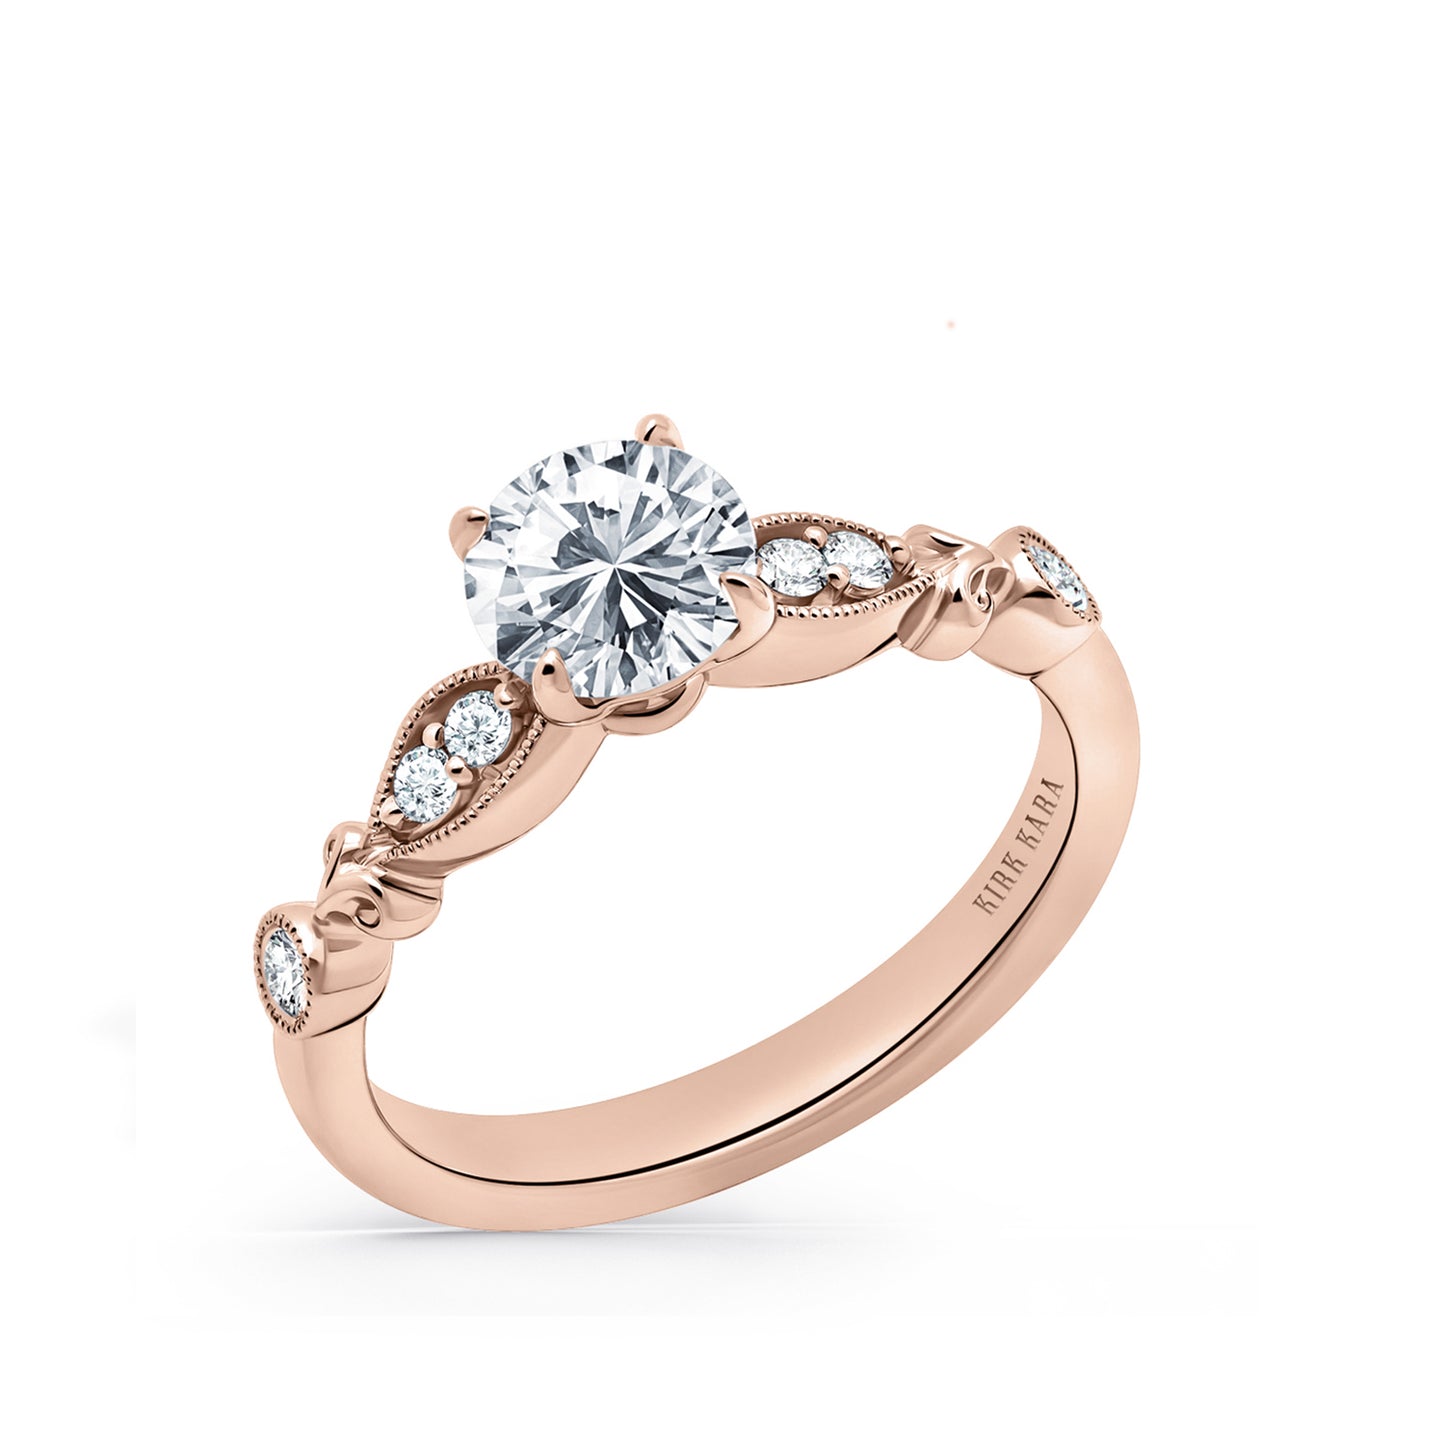 Floral Clover Diamond Engagement Ring